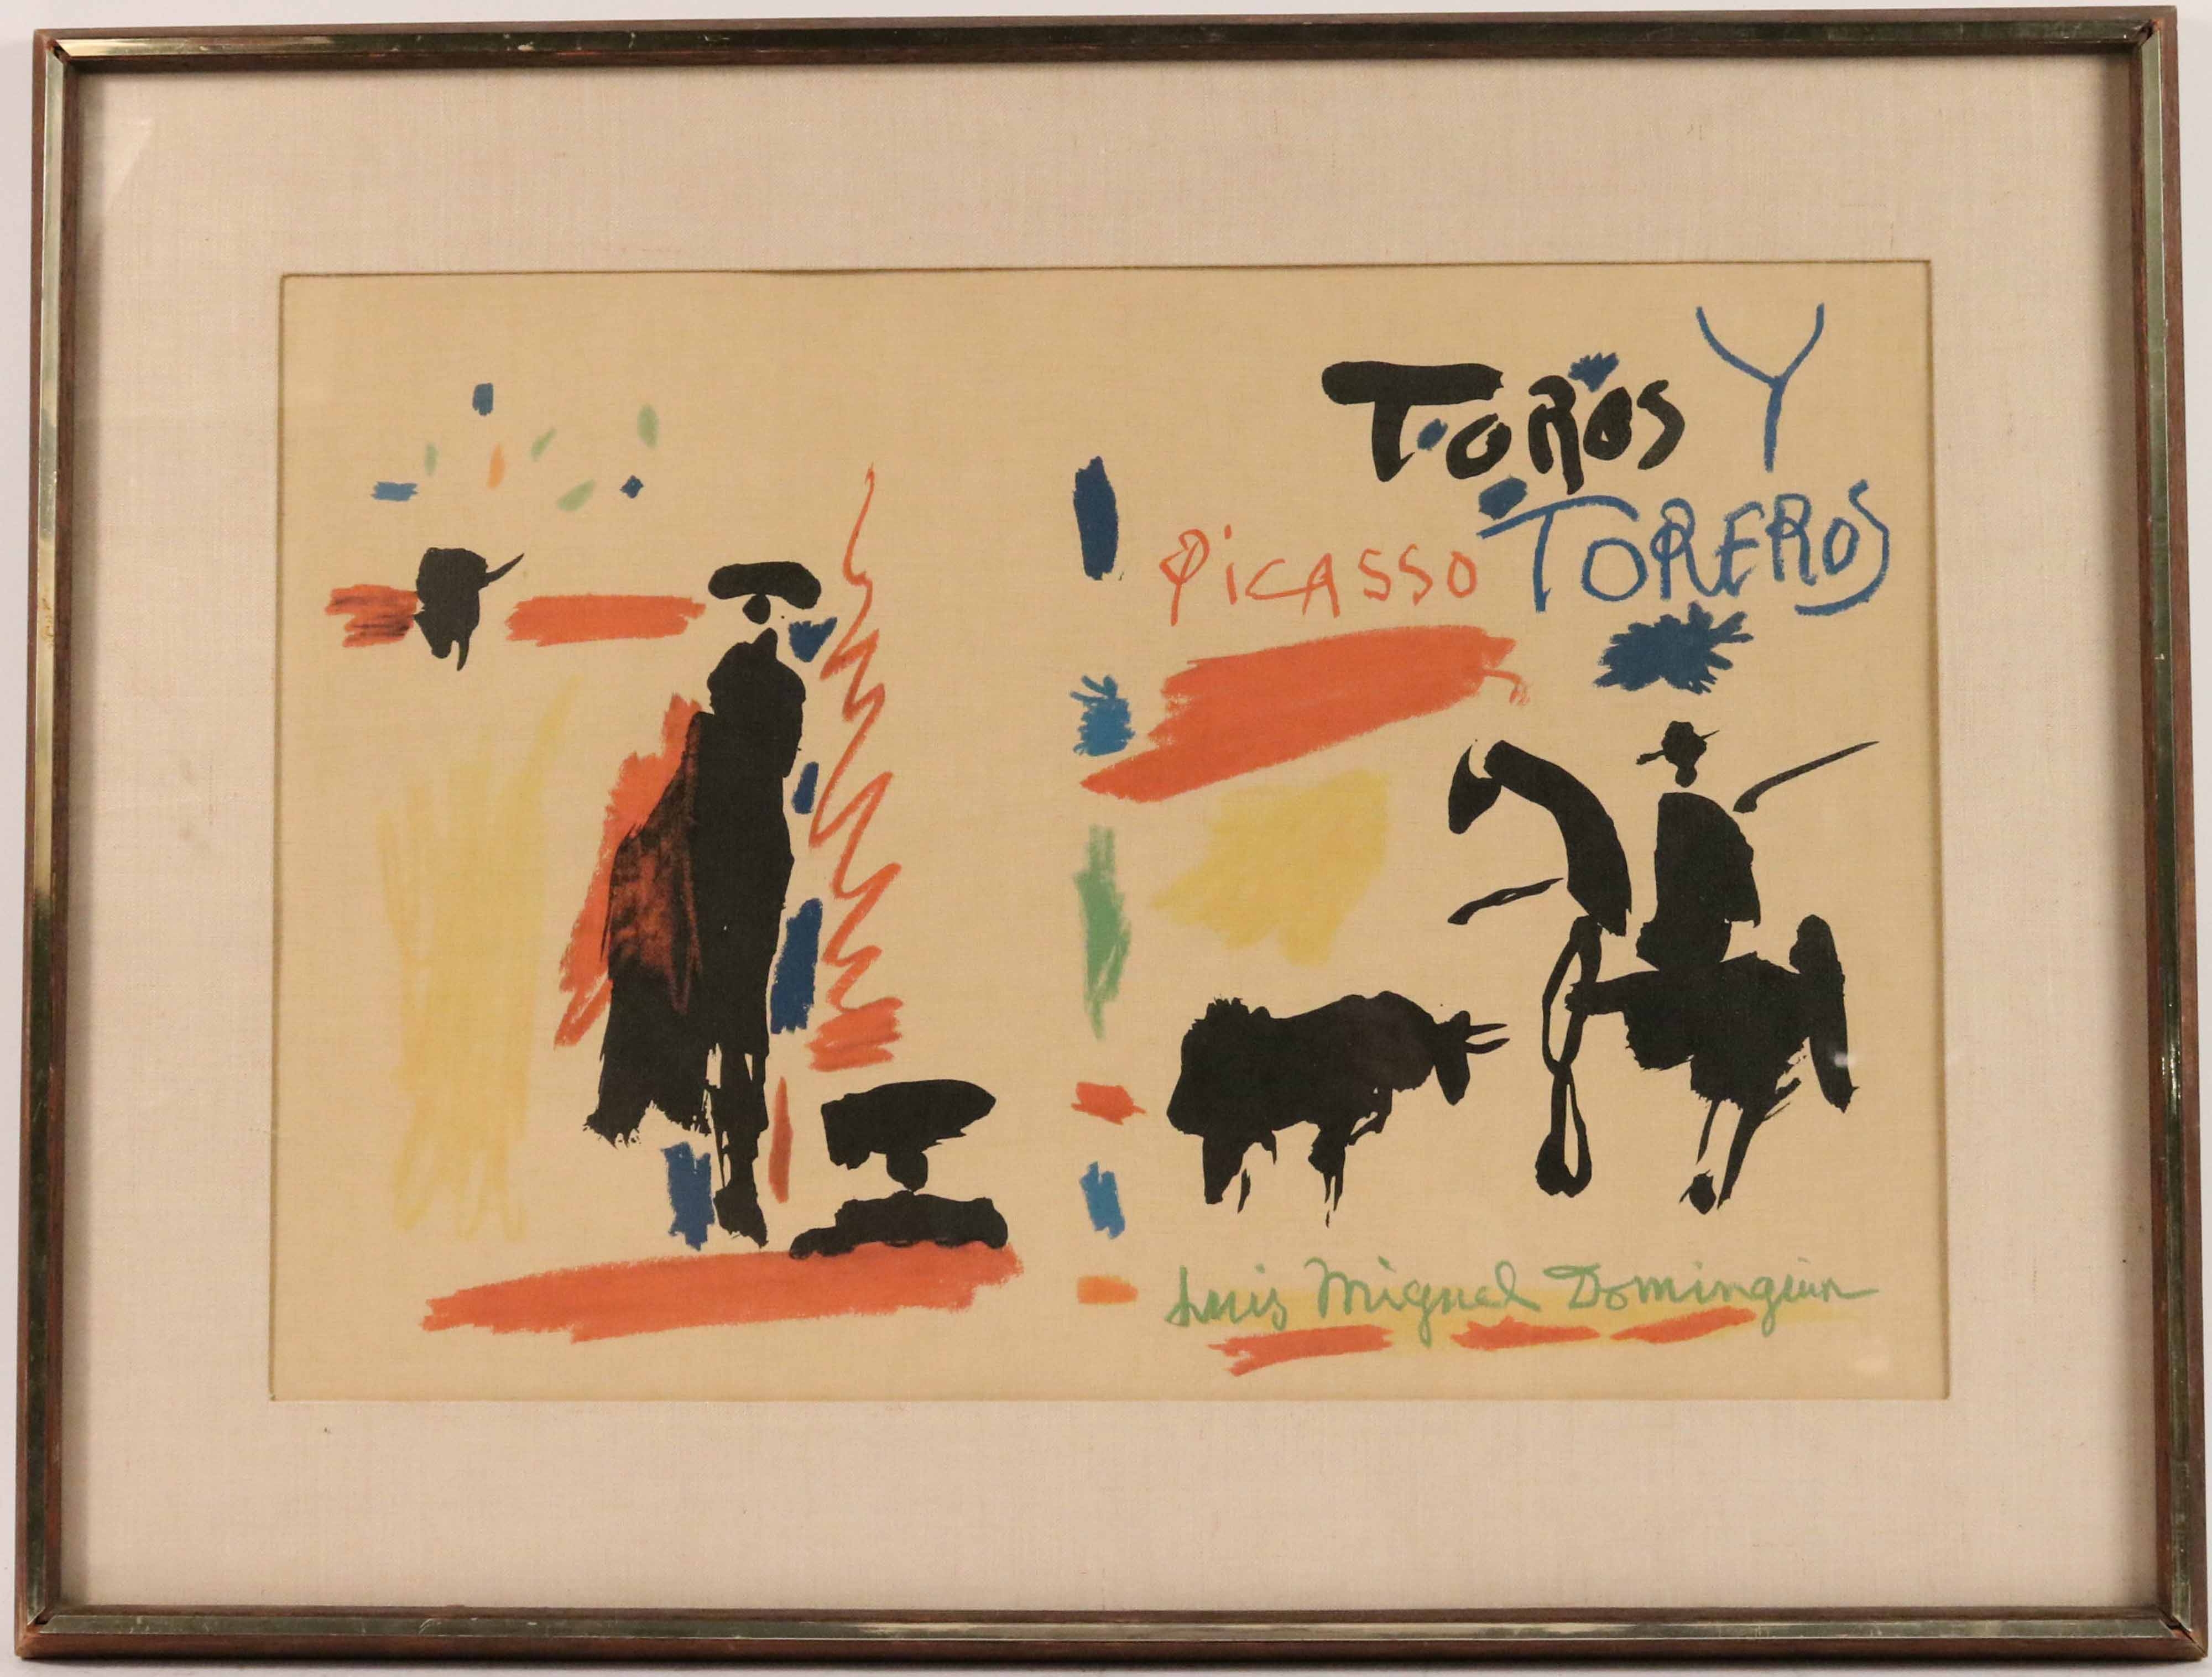 Artwork by Pablo Picasso, Toros y Toreros, Made of Lithograph printed on canvas